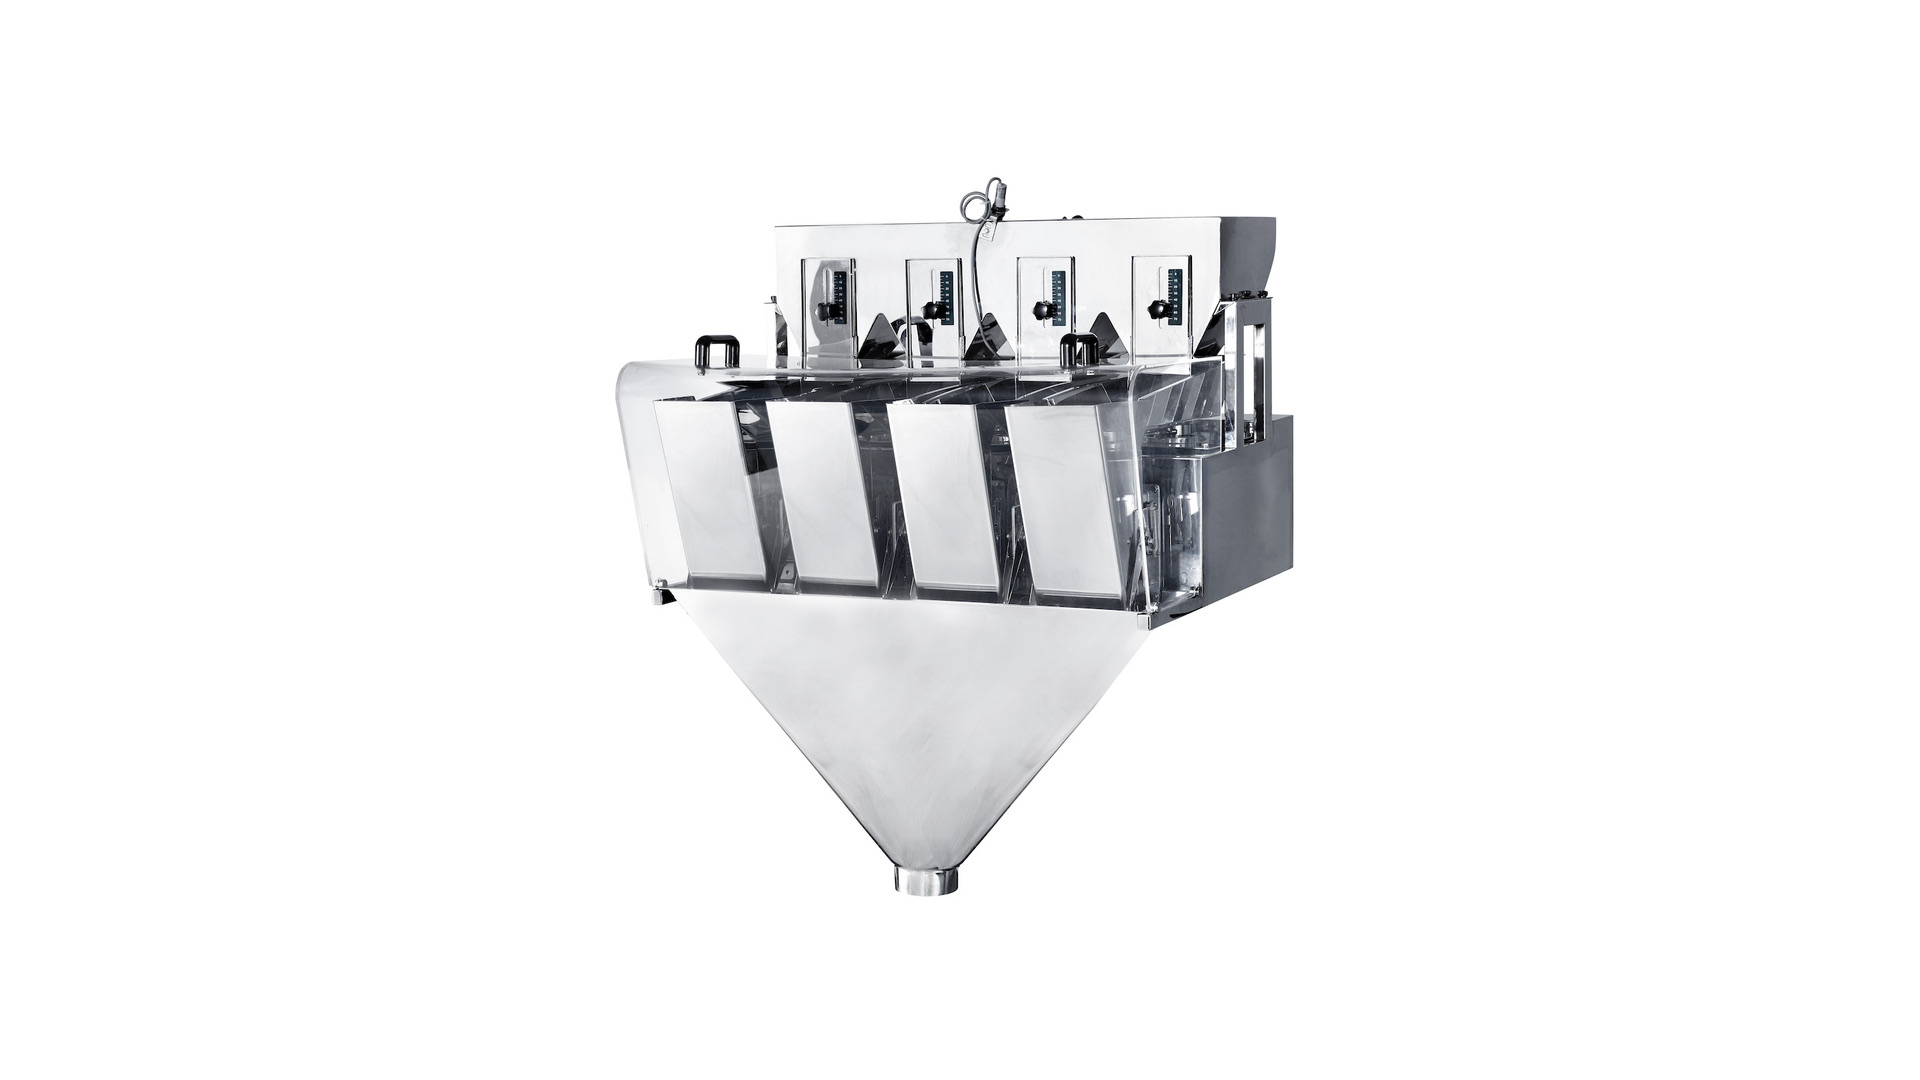 JMTronic dosing & multihead weigher